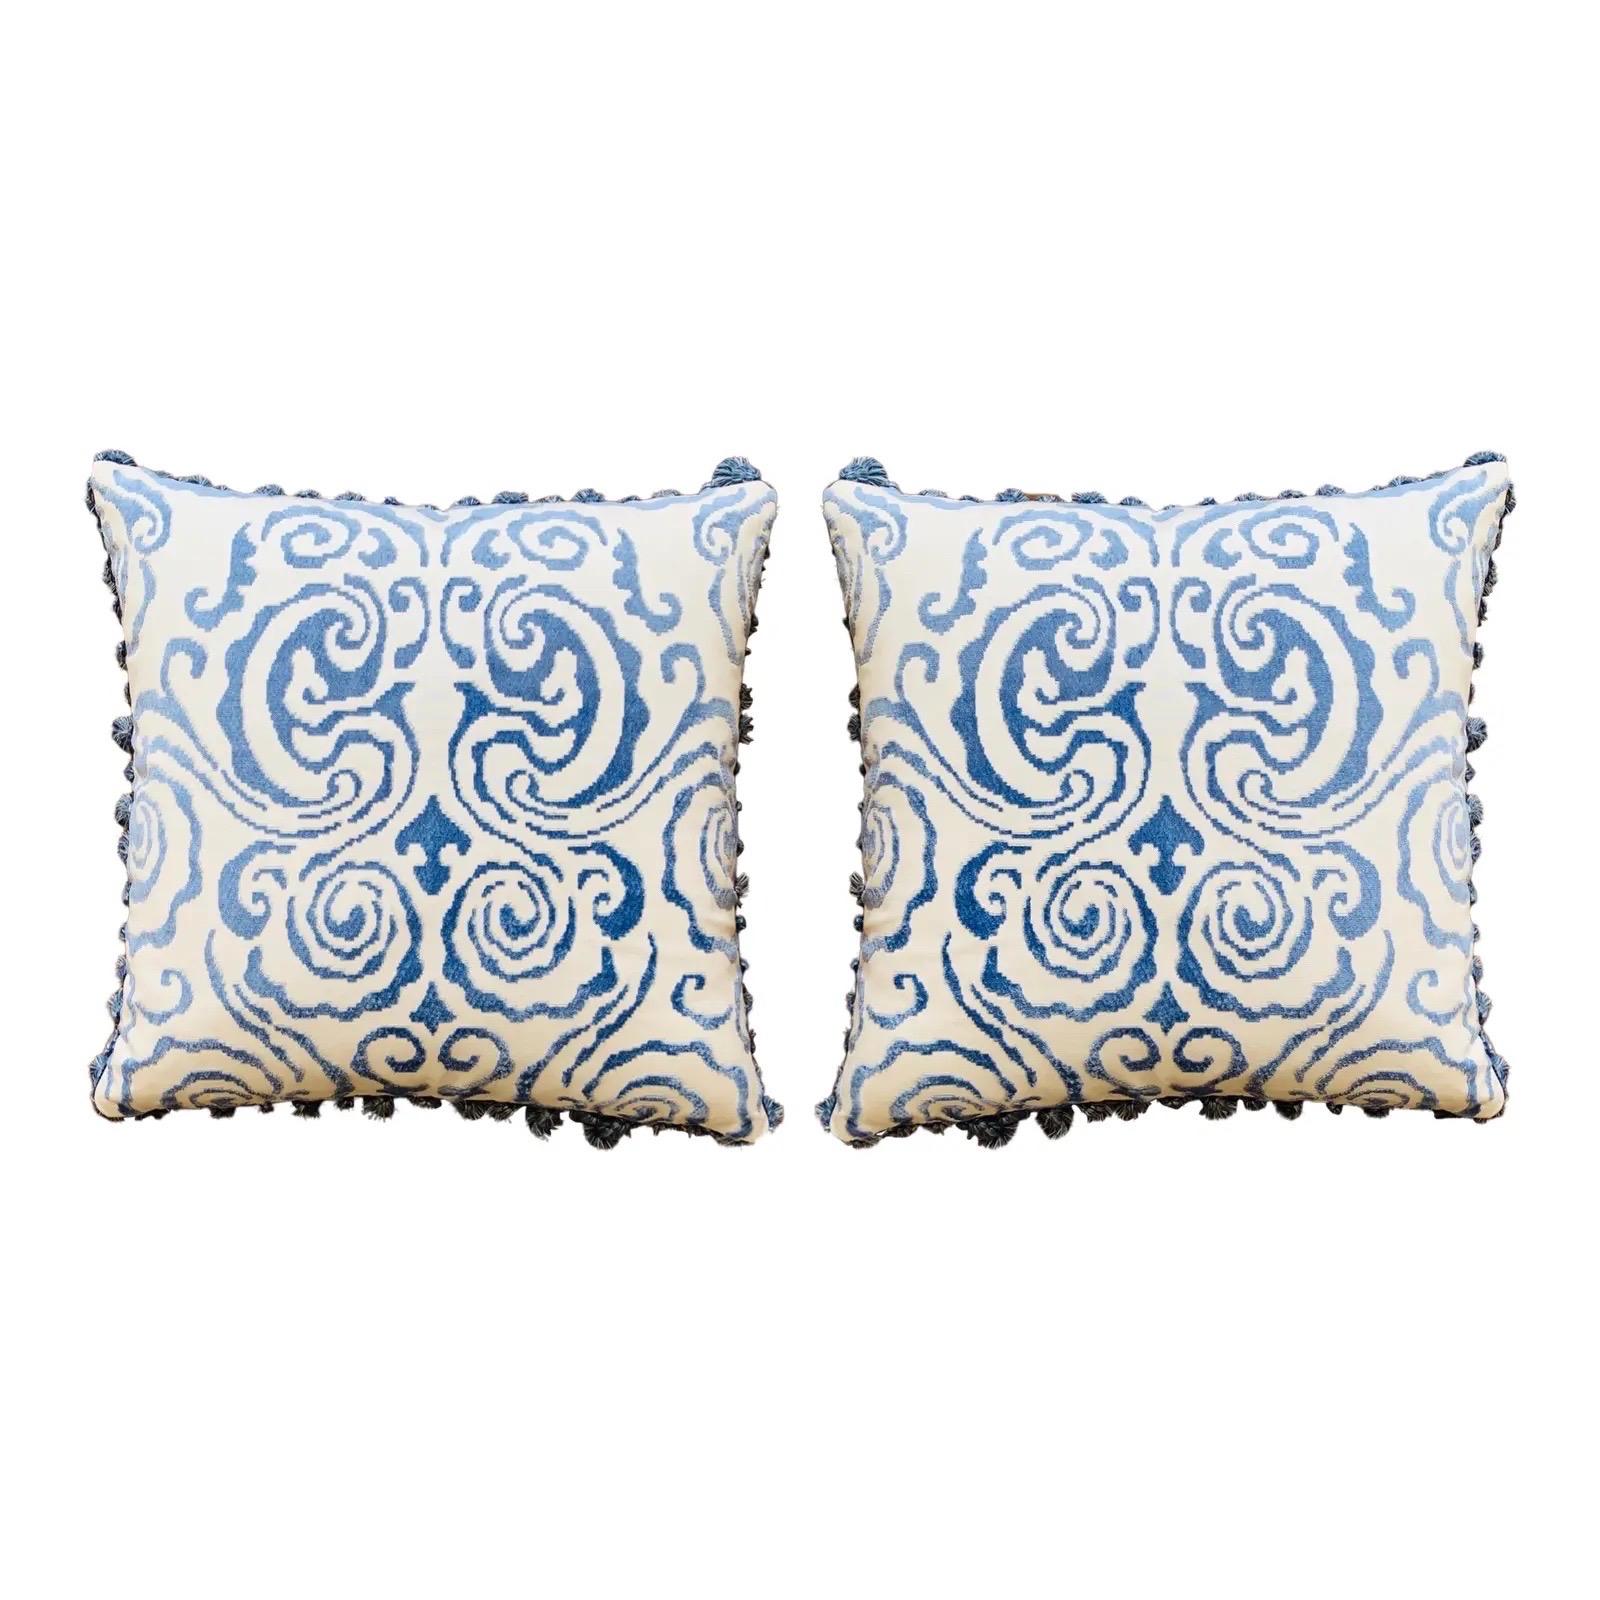 Scalamandré 'Cirrus Velvet Damask' White and Blue Pillows With Fringe, Pair